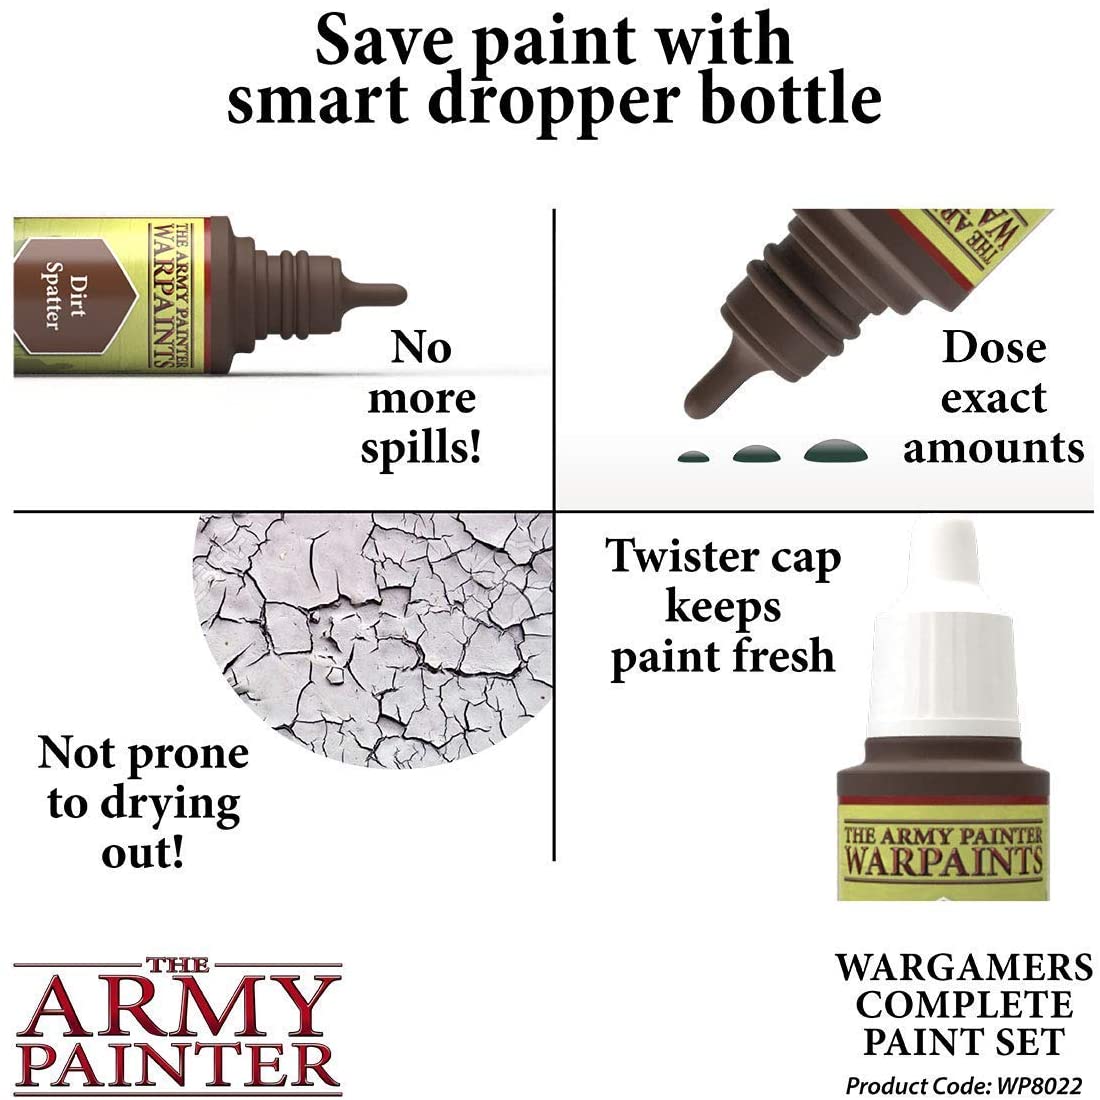 The Army Painter. Wargamers Complete Paint Set bottles